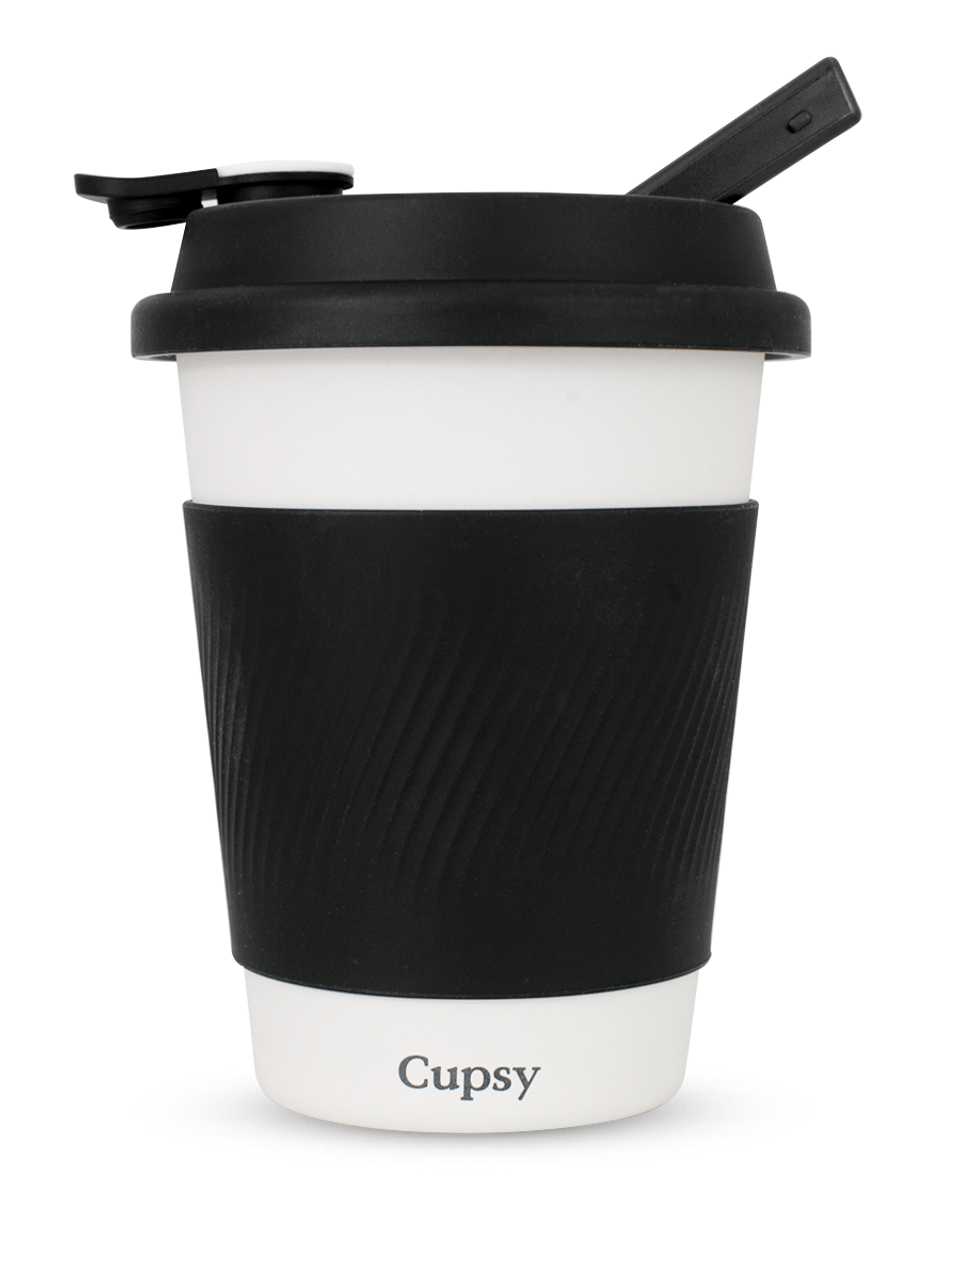 Puffco Cupsy - Front View of a Coffee Cup Styled Water Pipe with Black Accents